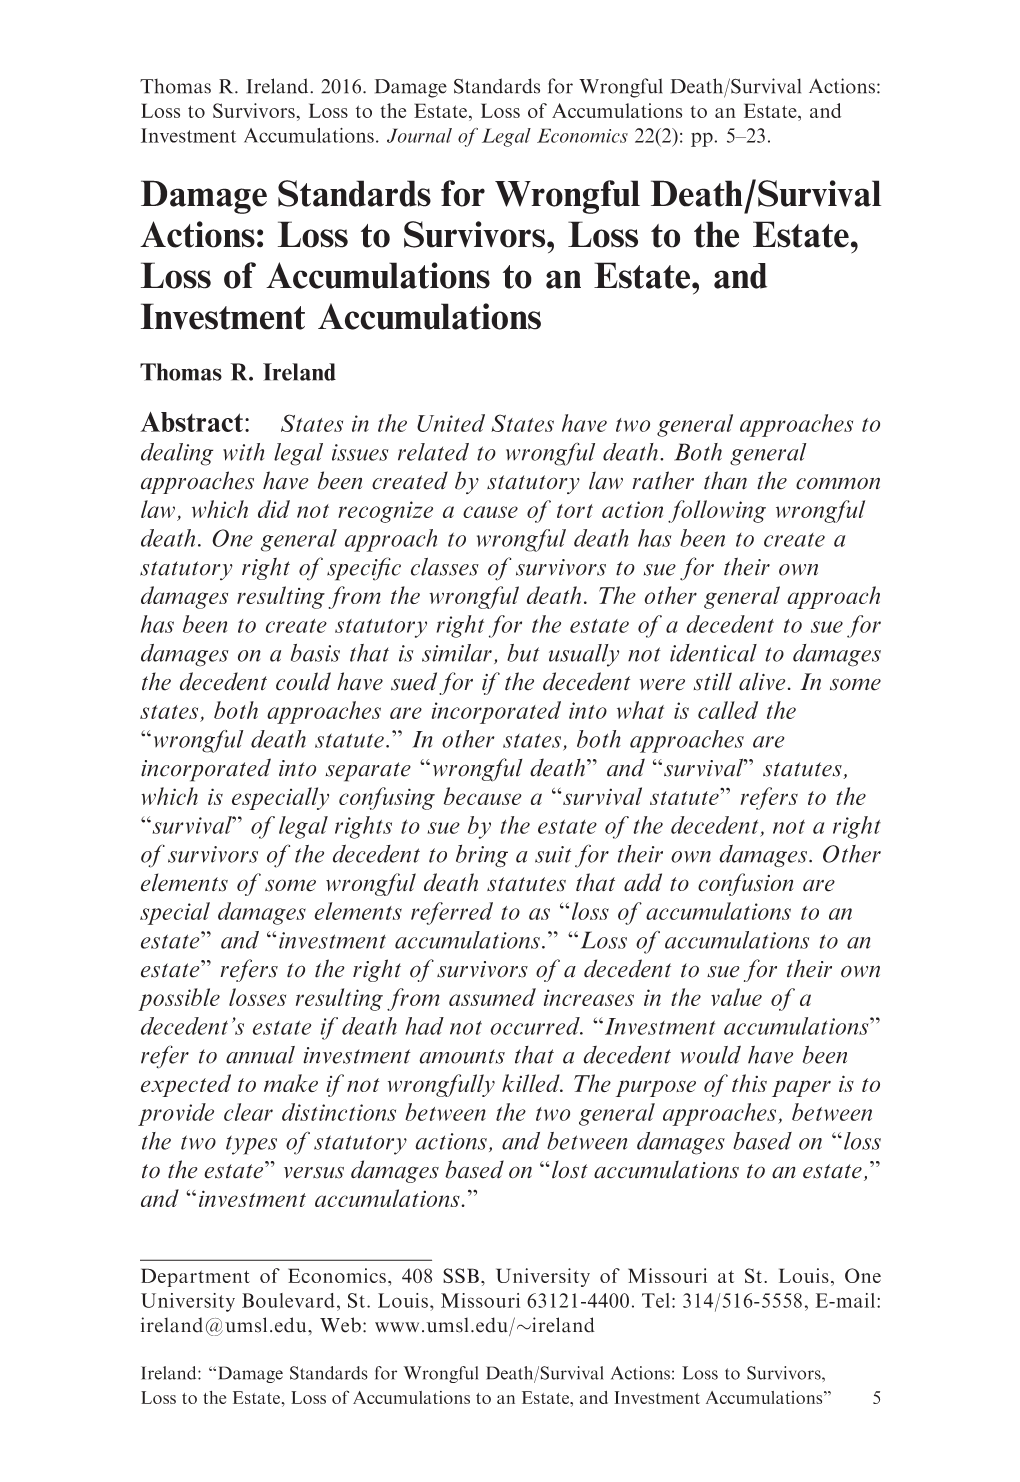 Damage Standards for Wrongful Death/Survival Actions: Loss to Survivors, Loss to the Estate, Loss of Accumulations to an Estate, and Investment Accumulations